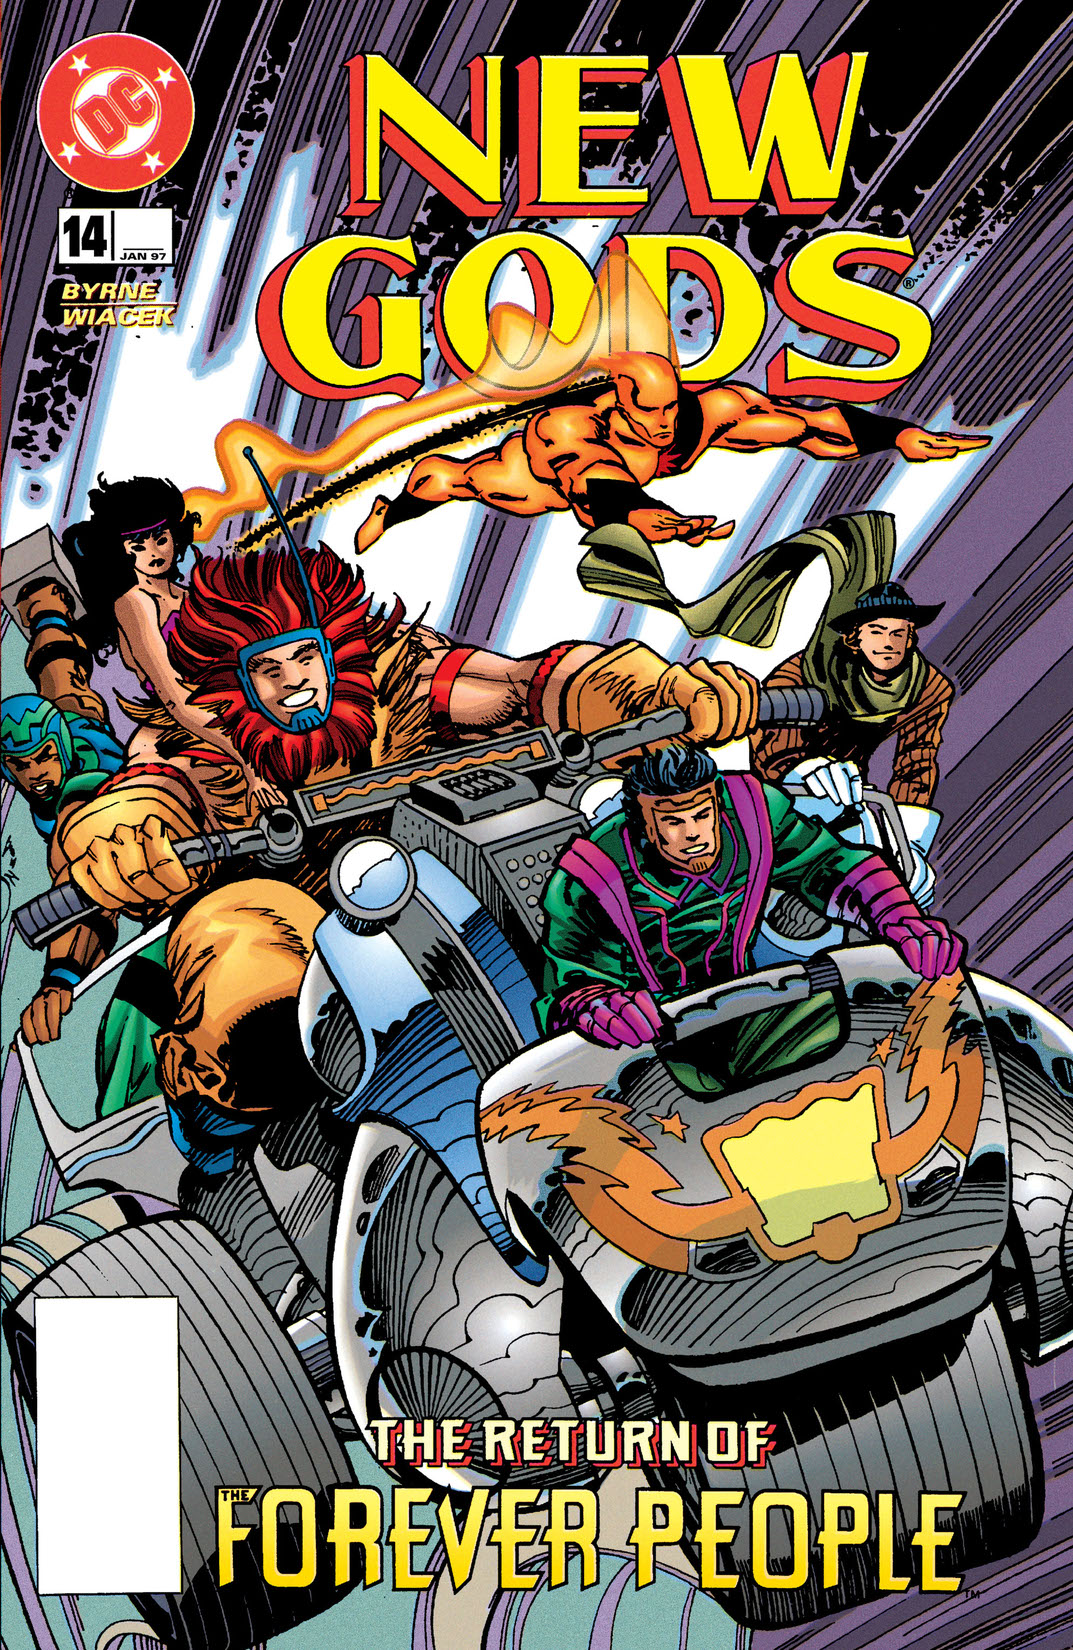 New Gods (1995-) #14 preview images